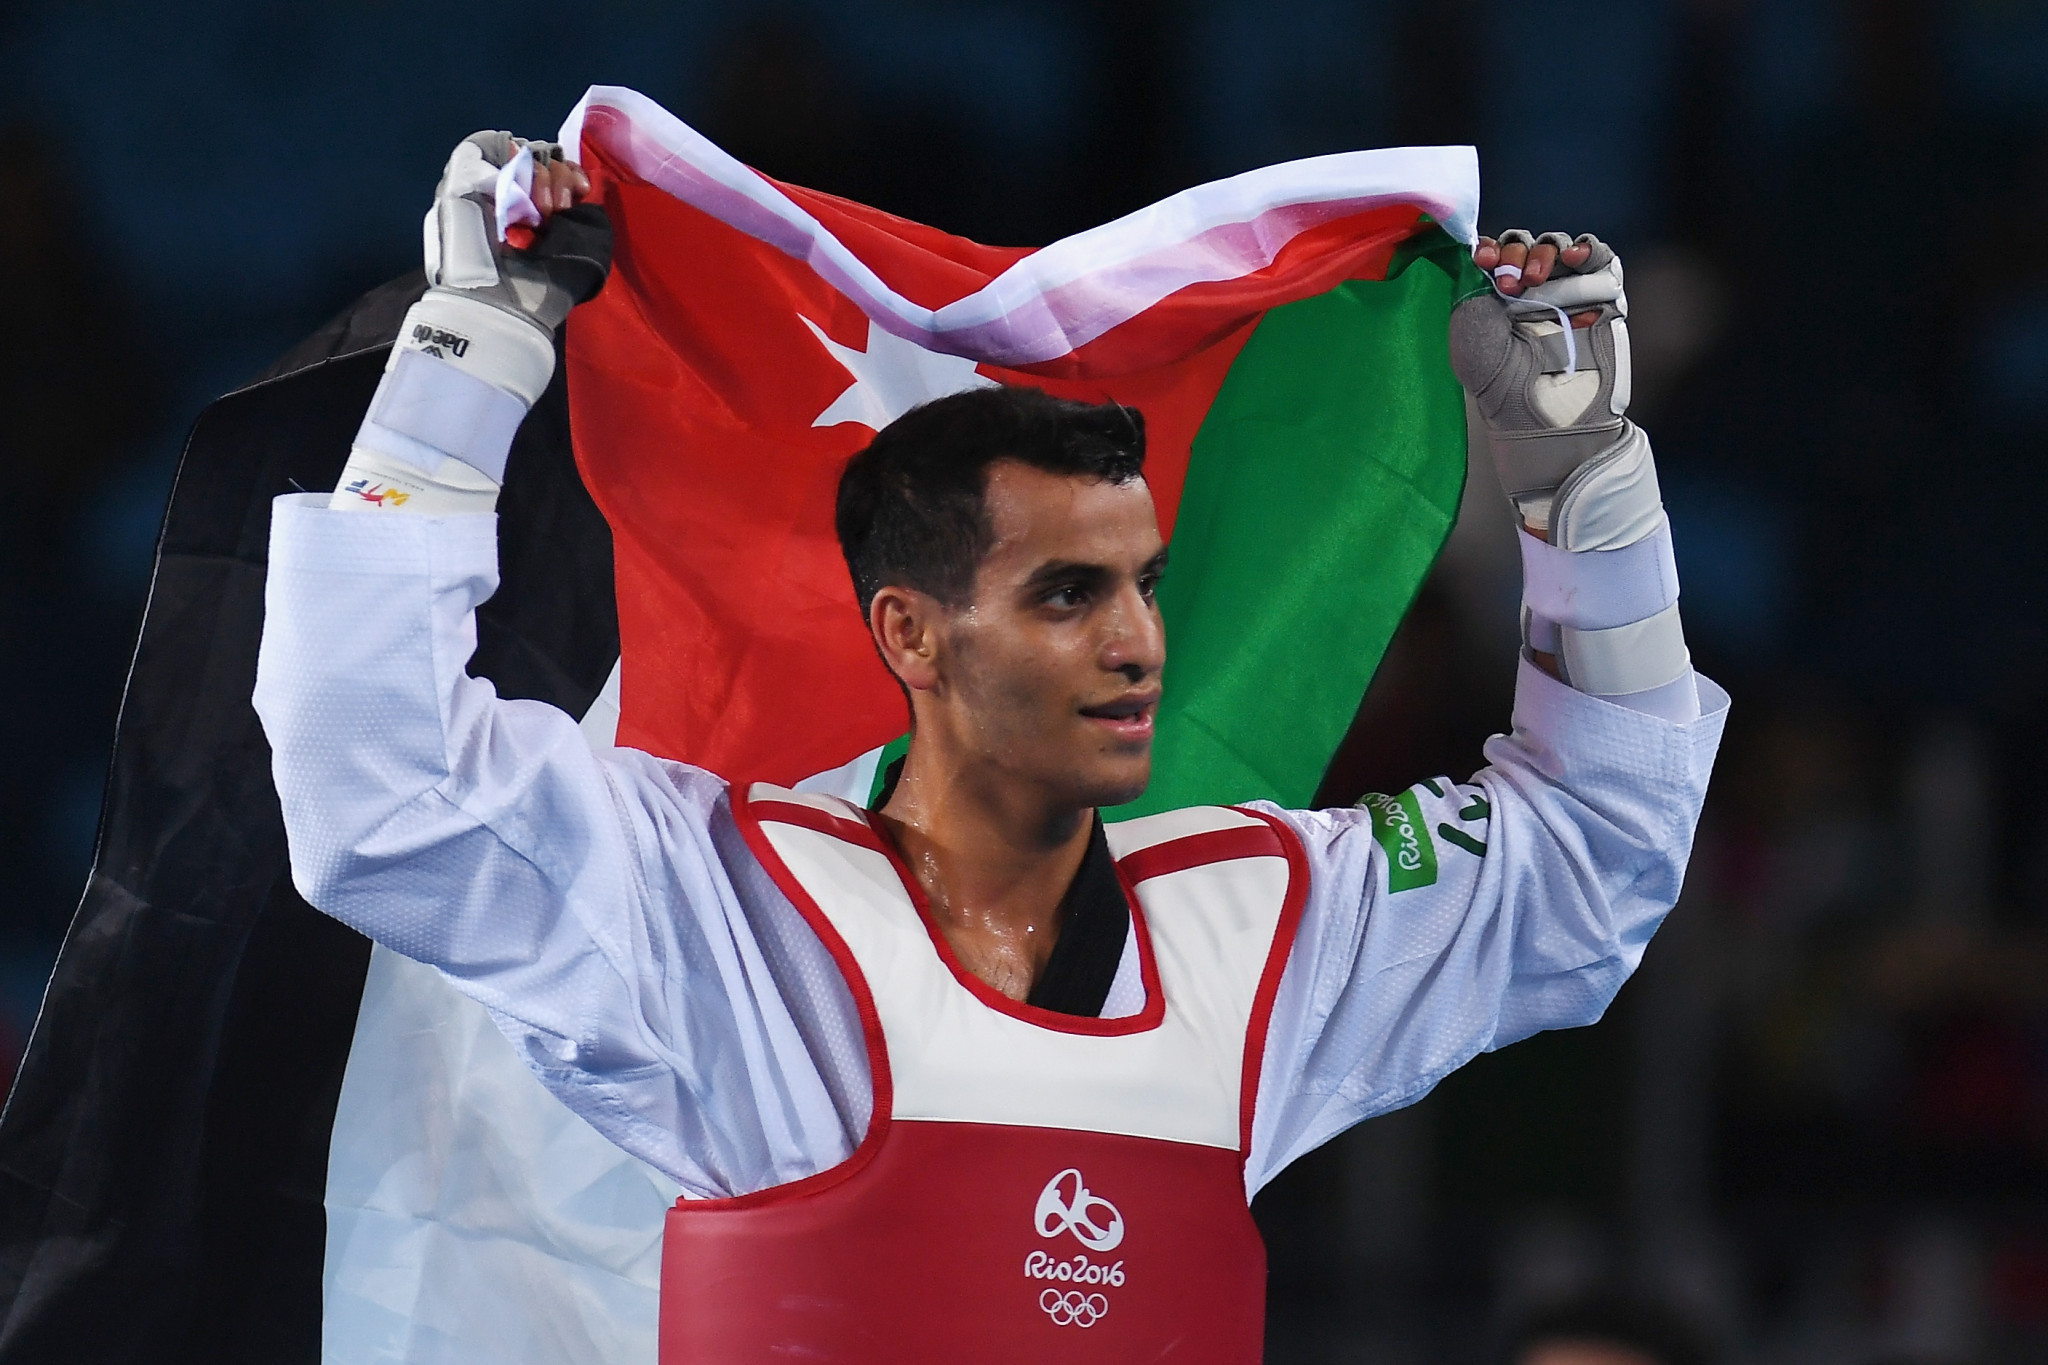 Ahmad Abughaush is the first Olympic champion from Jordan in any sport  ©Getty Images